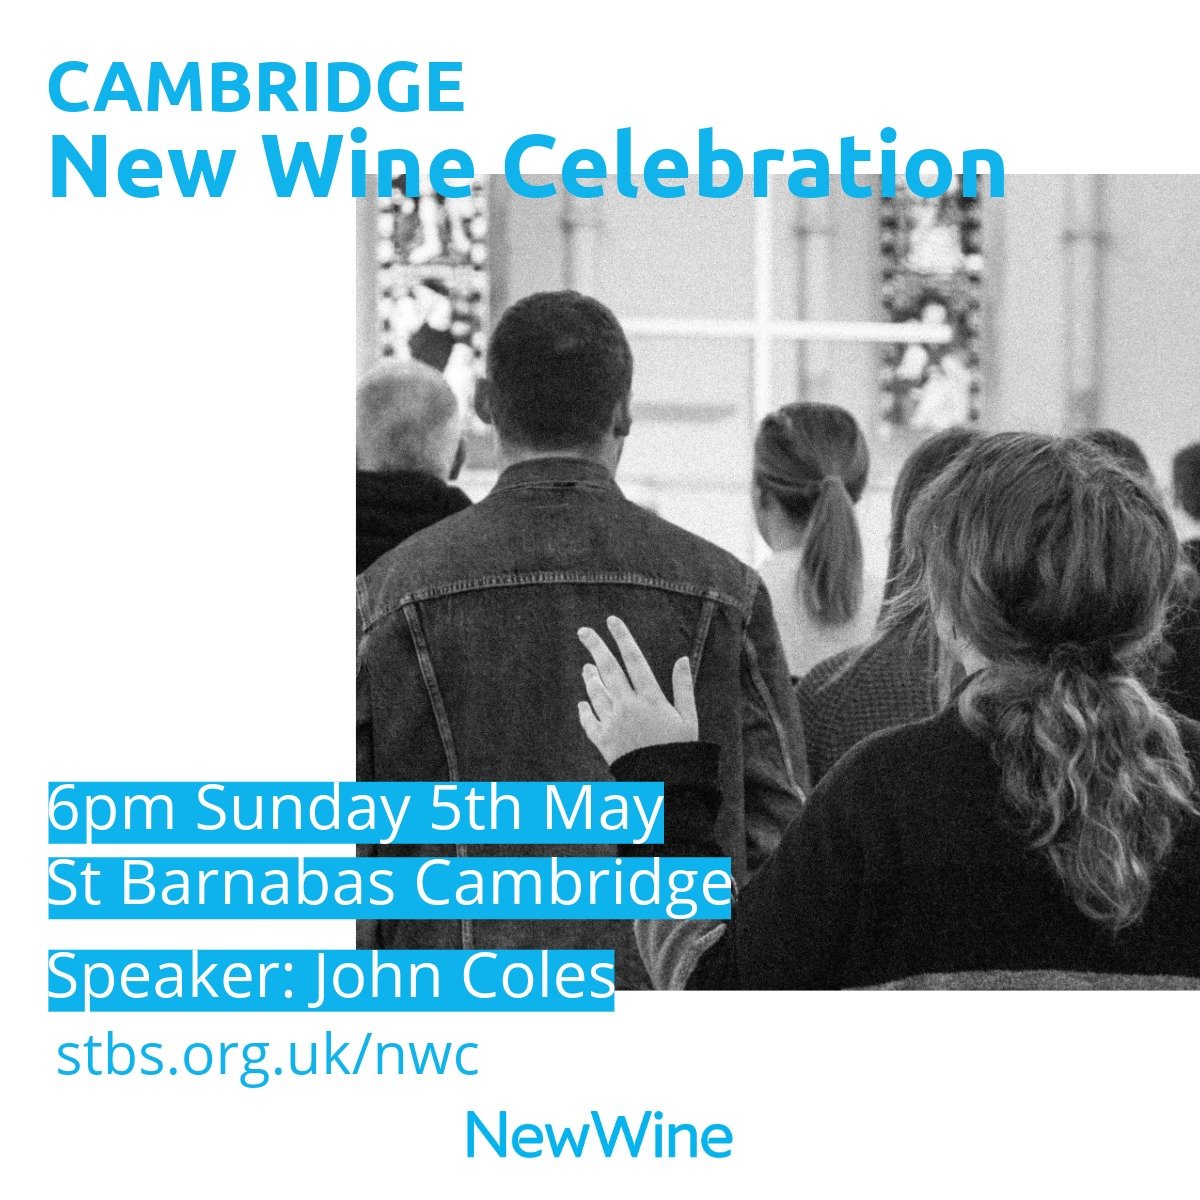 We're so excited to have John Coles speaking to us THIS SUNDAY at our New Wine Celebration. Churches across Cambridge will be gathering and you're invited!

Head to stbs.org.uk/nwc for more information

#newwine #cambridgechurches